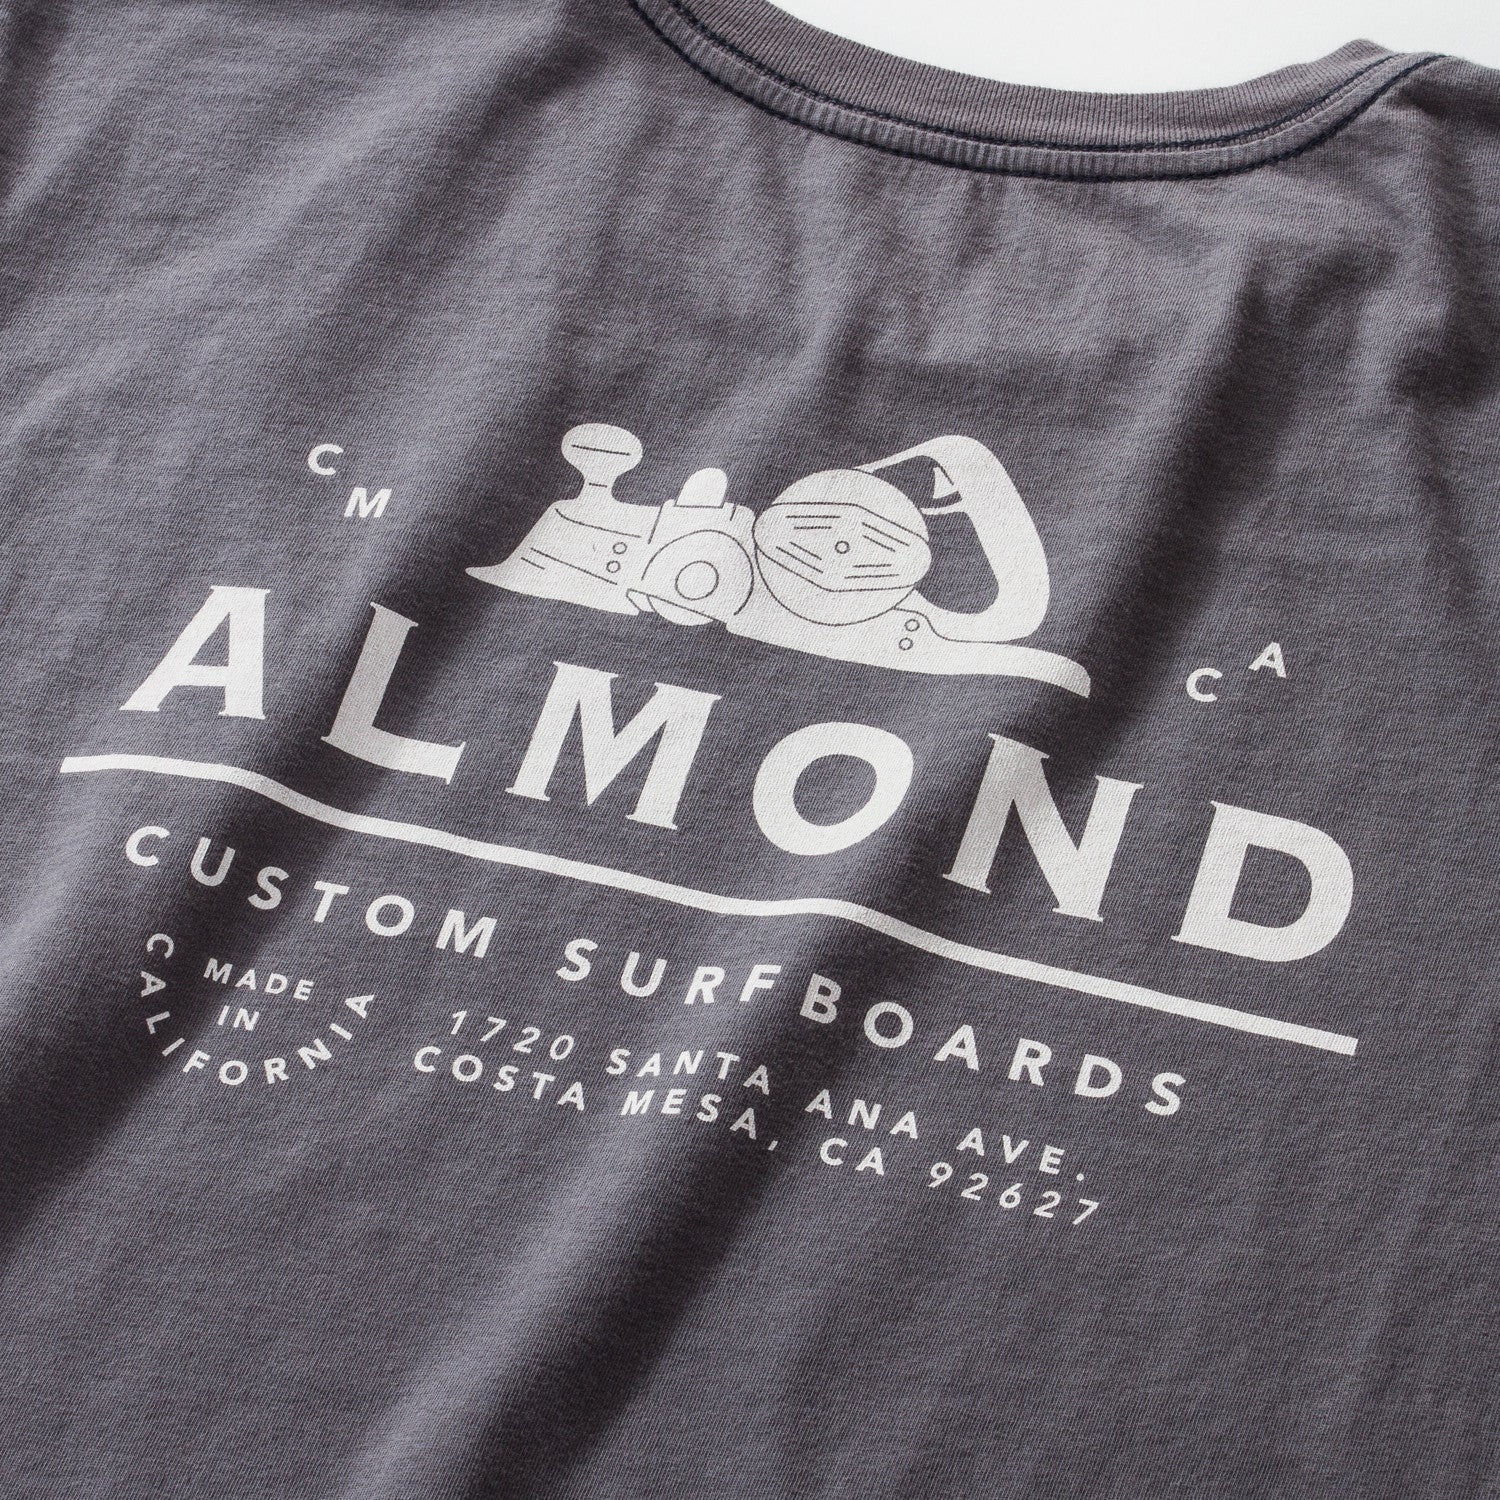 New Men's Surf T-Shirts from Almond Surfboards